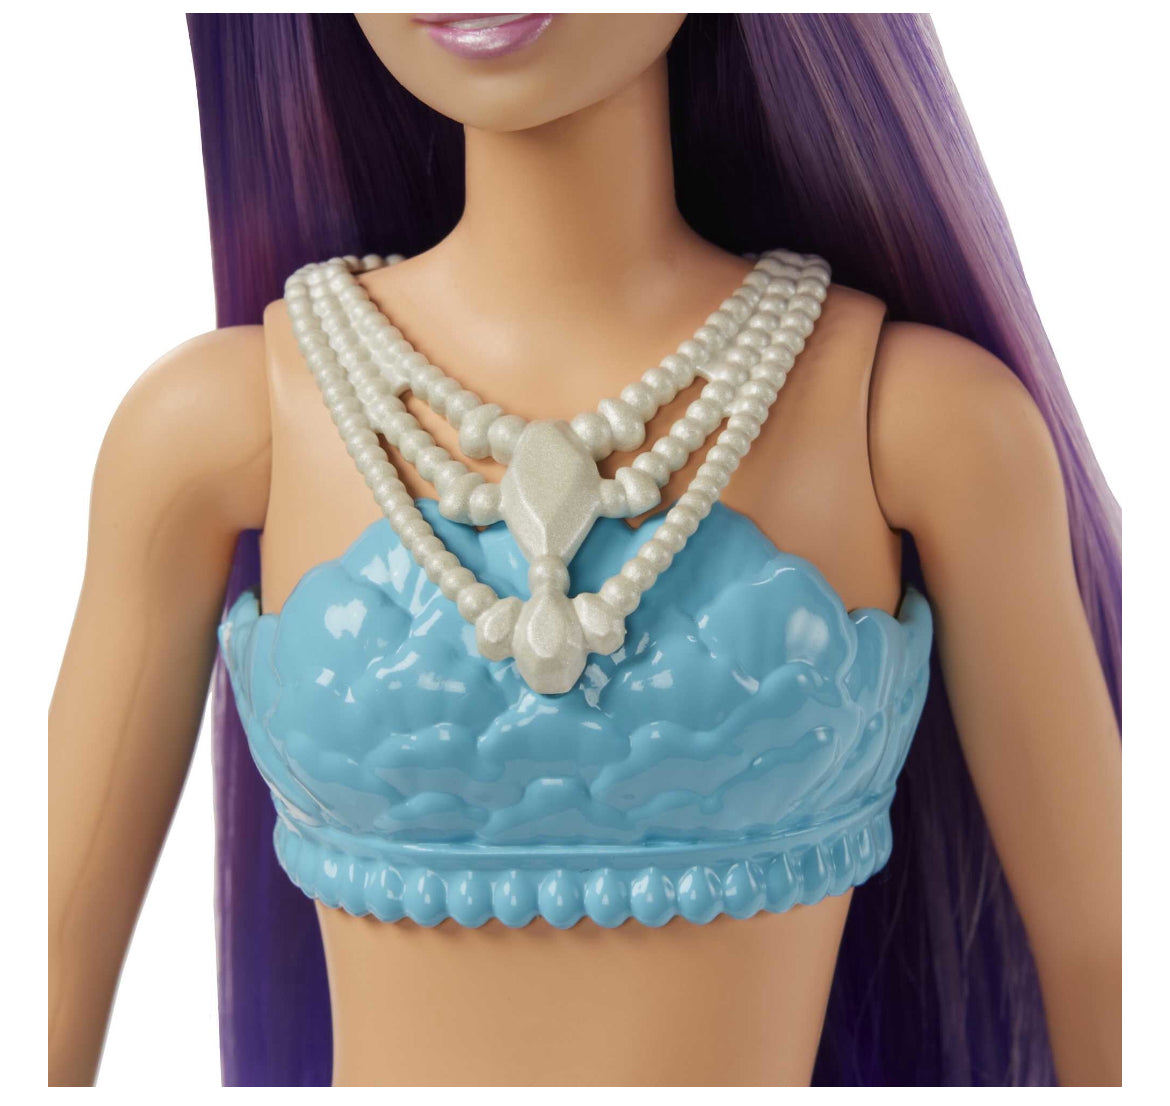 How to Make a Seashell Bra for Dolls